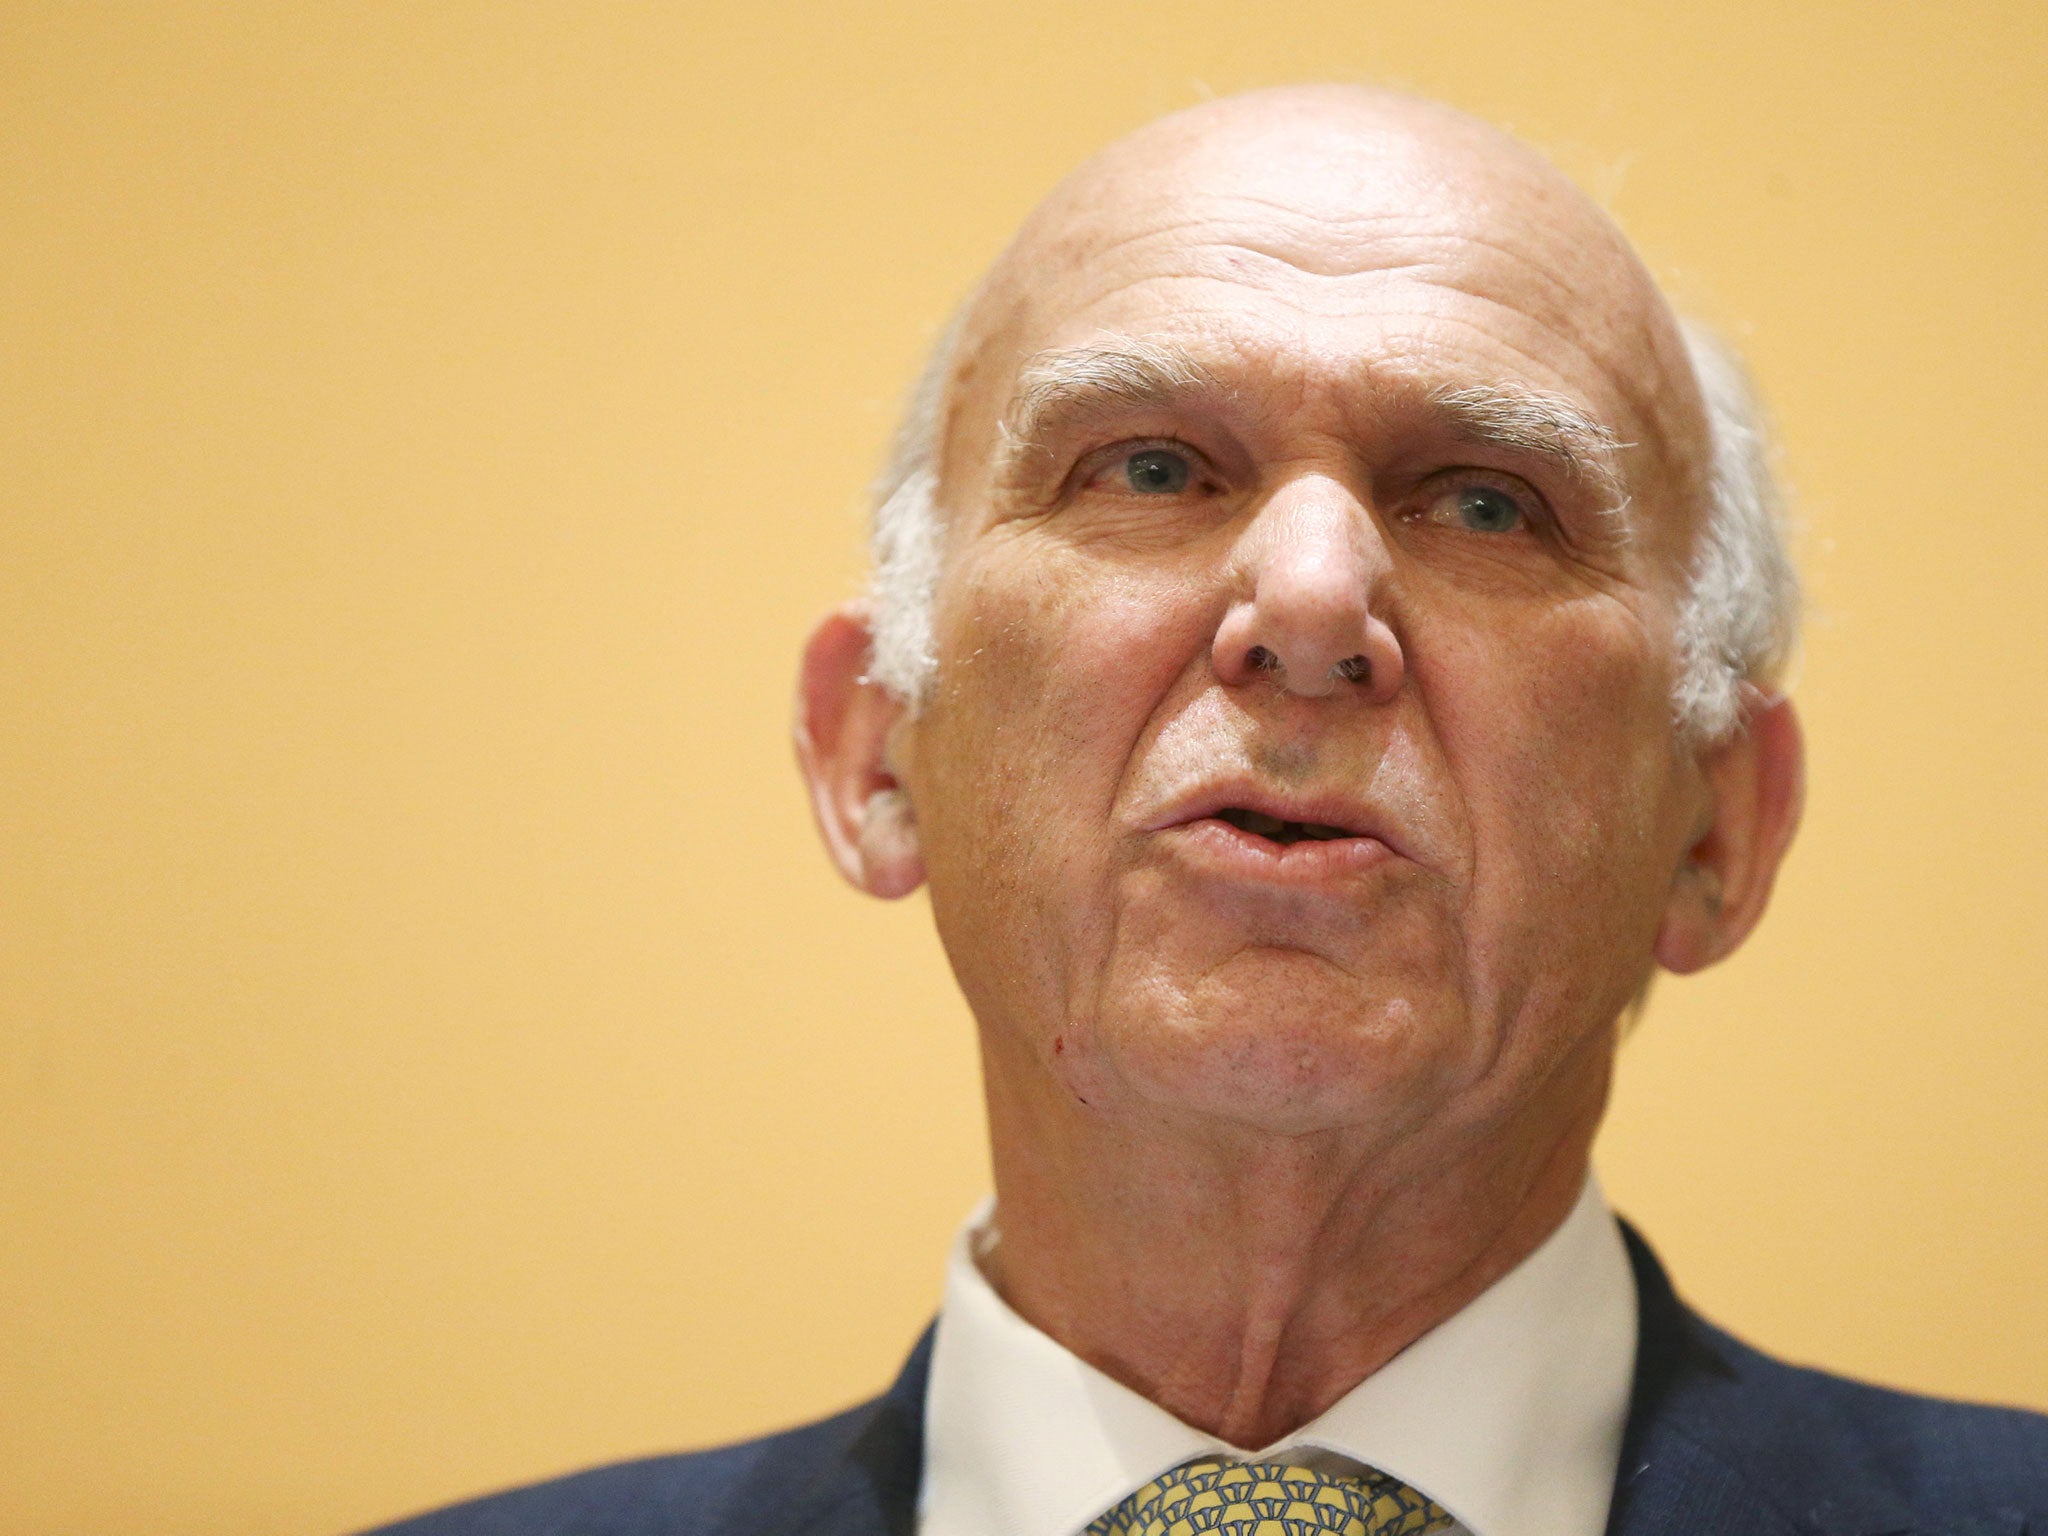 Sir Vince Cable: immigration is complementary to the interests of British workers, not complimentary